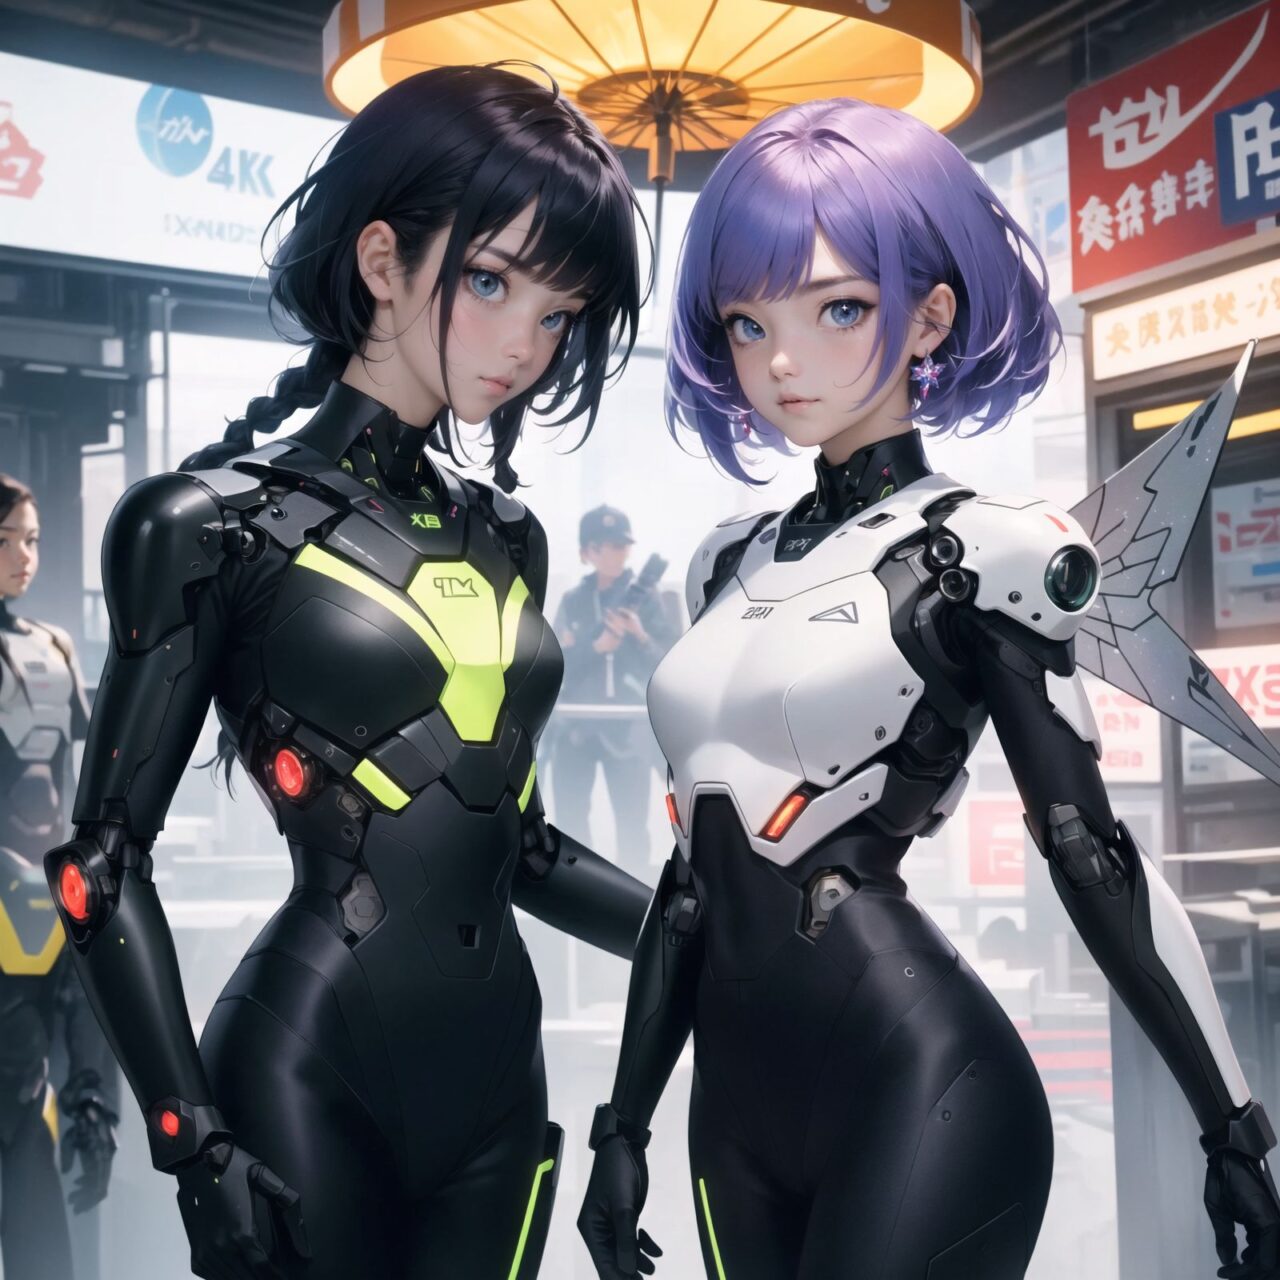 Two cyborg girls, facing the camera, cowboy shot (from waist up), 
one girl with long pink hair, braided with silver threads, wearing a sleek black bodysuit with neon accents, robotic arms with intricate designs, blue glowing eyes, playful smile, holding a small holographic device projecting a cute animal,

the other girl with short purple hair, styled in a futuristic bob, wearing a white and gold exoskeleton suit, her eyes a striking green with circuit patterns, serious expression, delicate robotic wings folded behind her, holding a staff with a floating crystal,

background of a bustling futuristic marketplace, vibrant neon lights, hovering vendor stalls, various alien and human customers, blending natural elements like hanging gardens and water features,

soft and dynamic lighting, high detail, capturing the textures of their hair and clothing, professional clarity, ultra-high resolution, 4K quality, anime-inspired visuals, emphasizing their unique characteristics and interactions